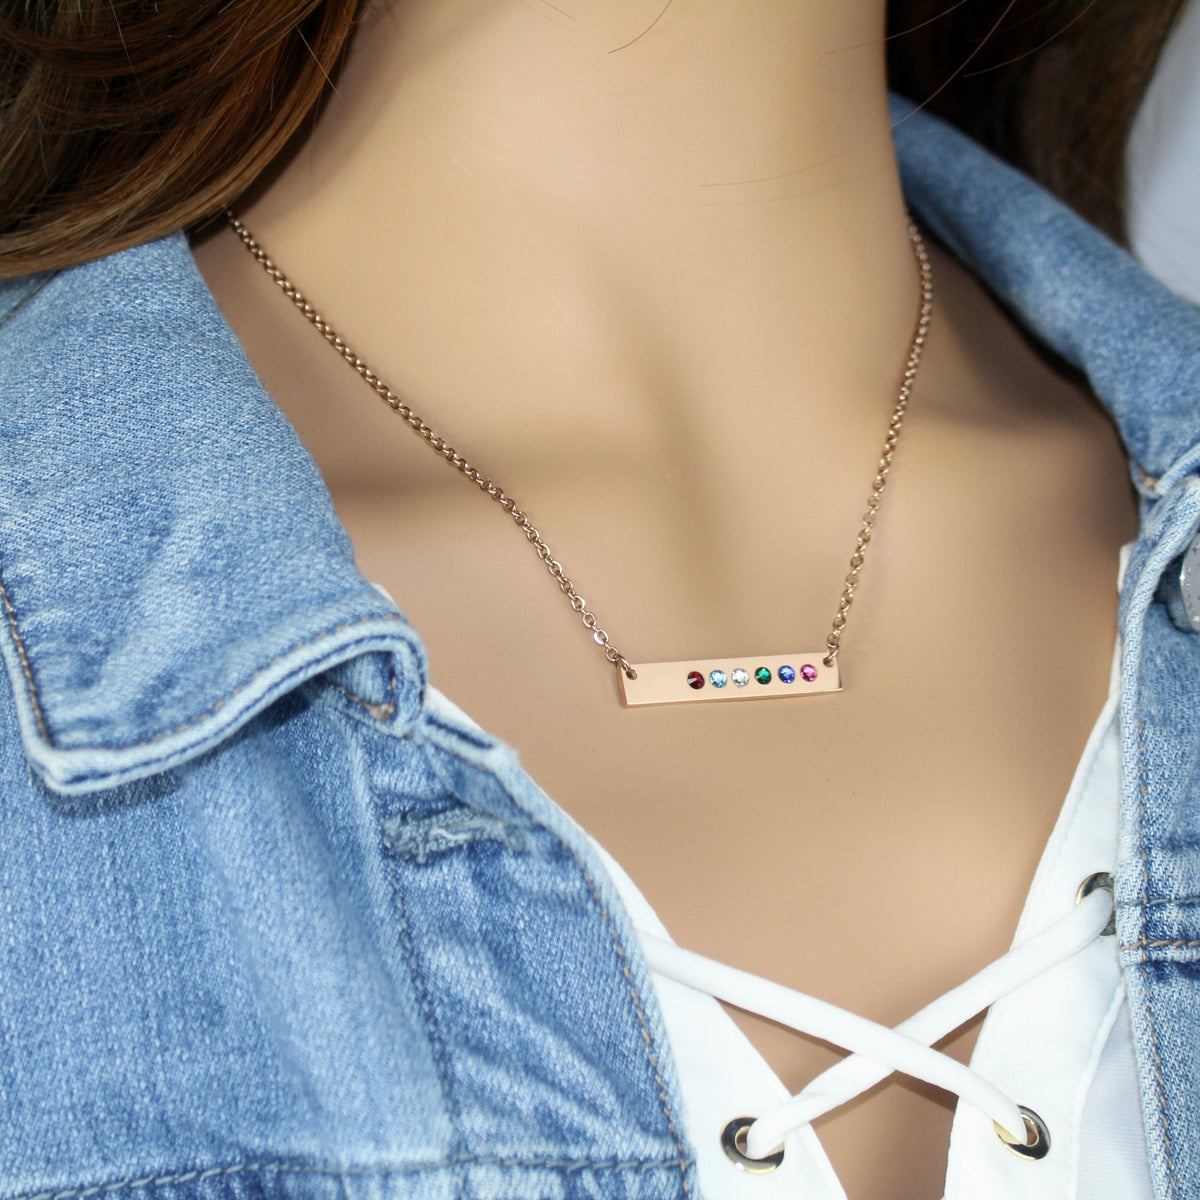 Rose Gold Horizontal Birthstone Bar Necklace - Love It Personalized